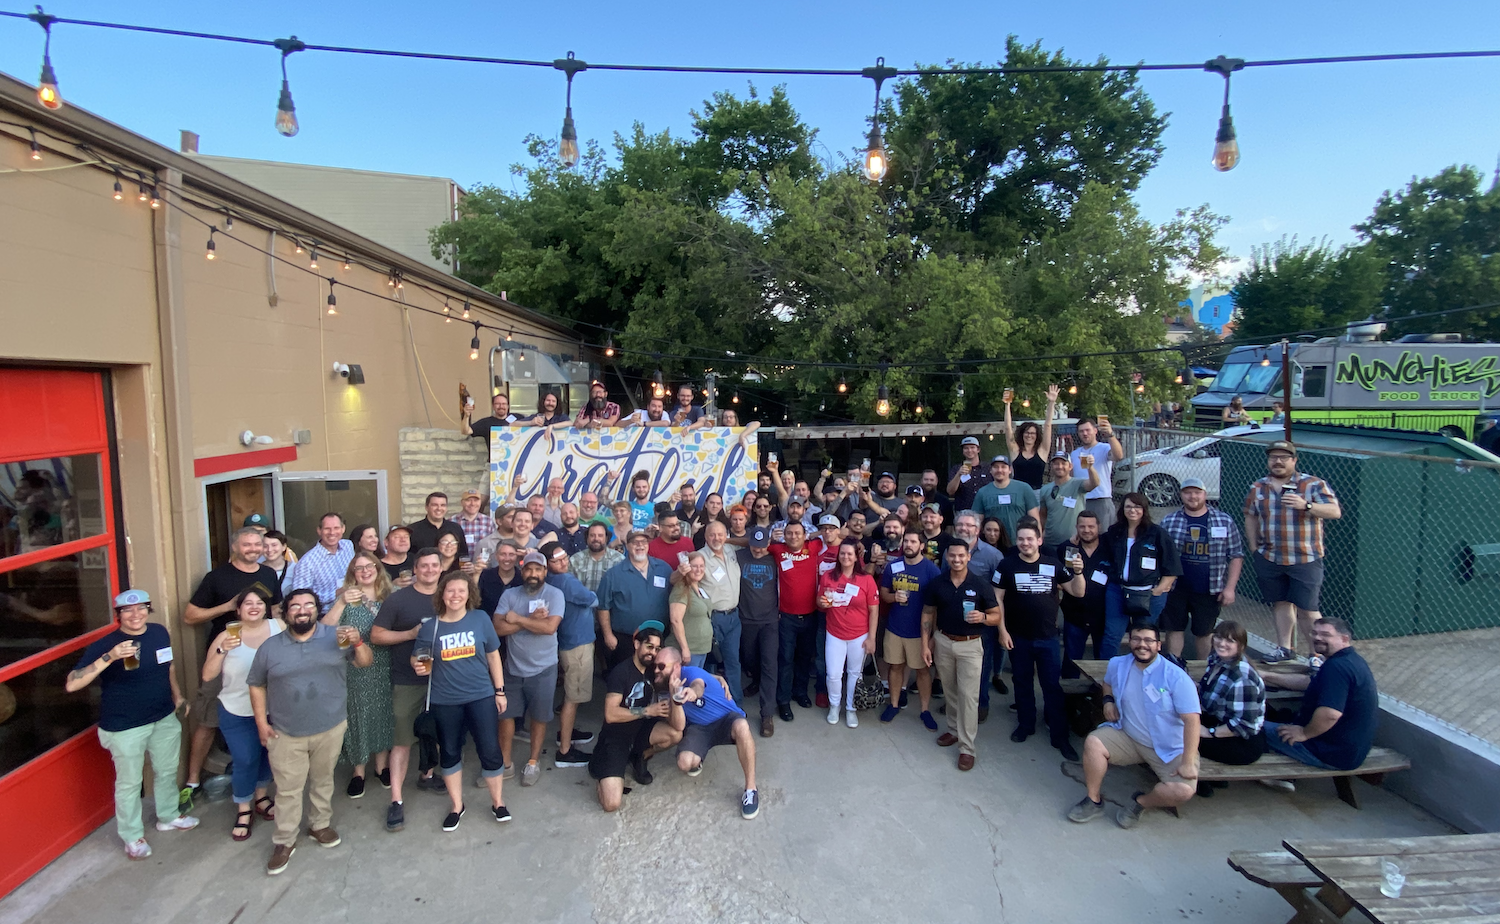 The Texas Craft Brewers Guild meeting from July 2021, hosted by Denton County Brewing Company. Image courtesy of Denton County Brewing Company.